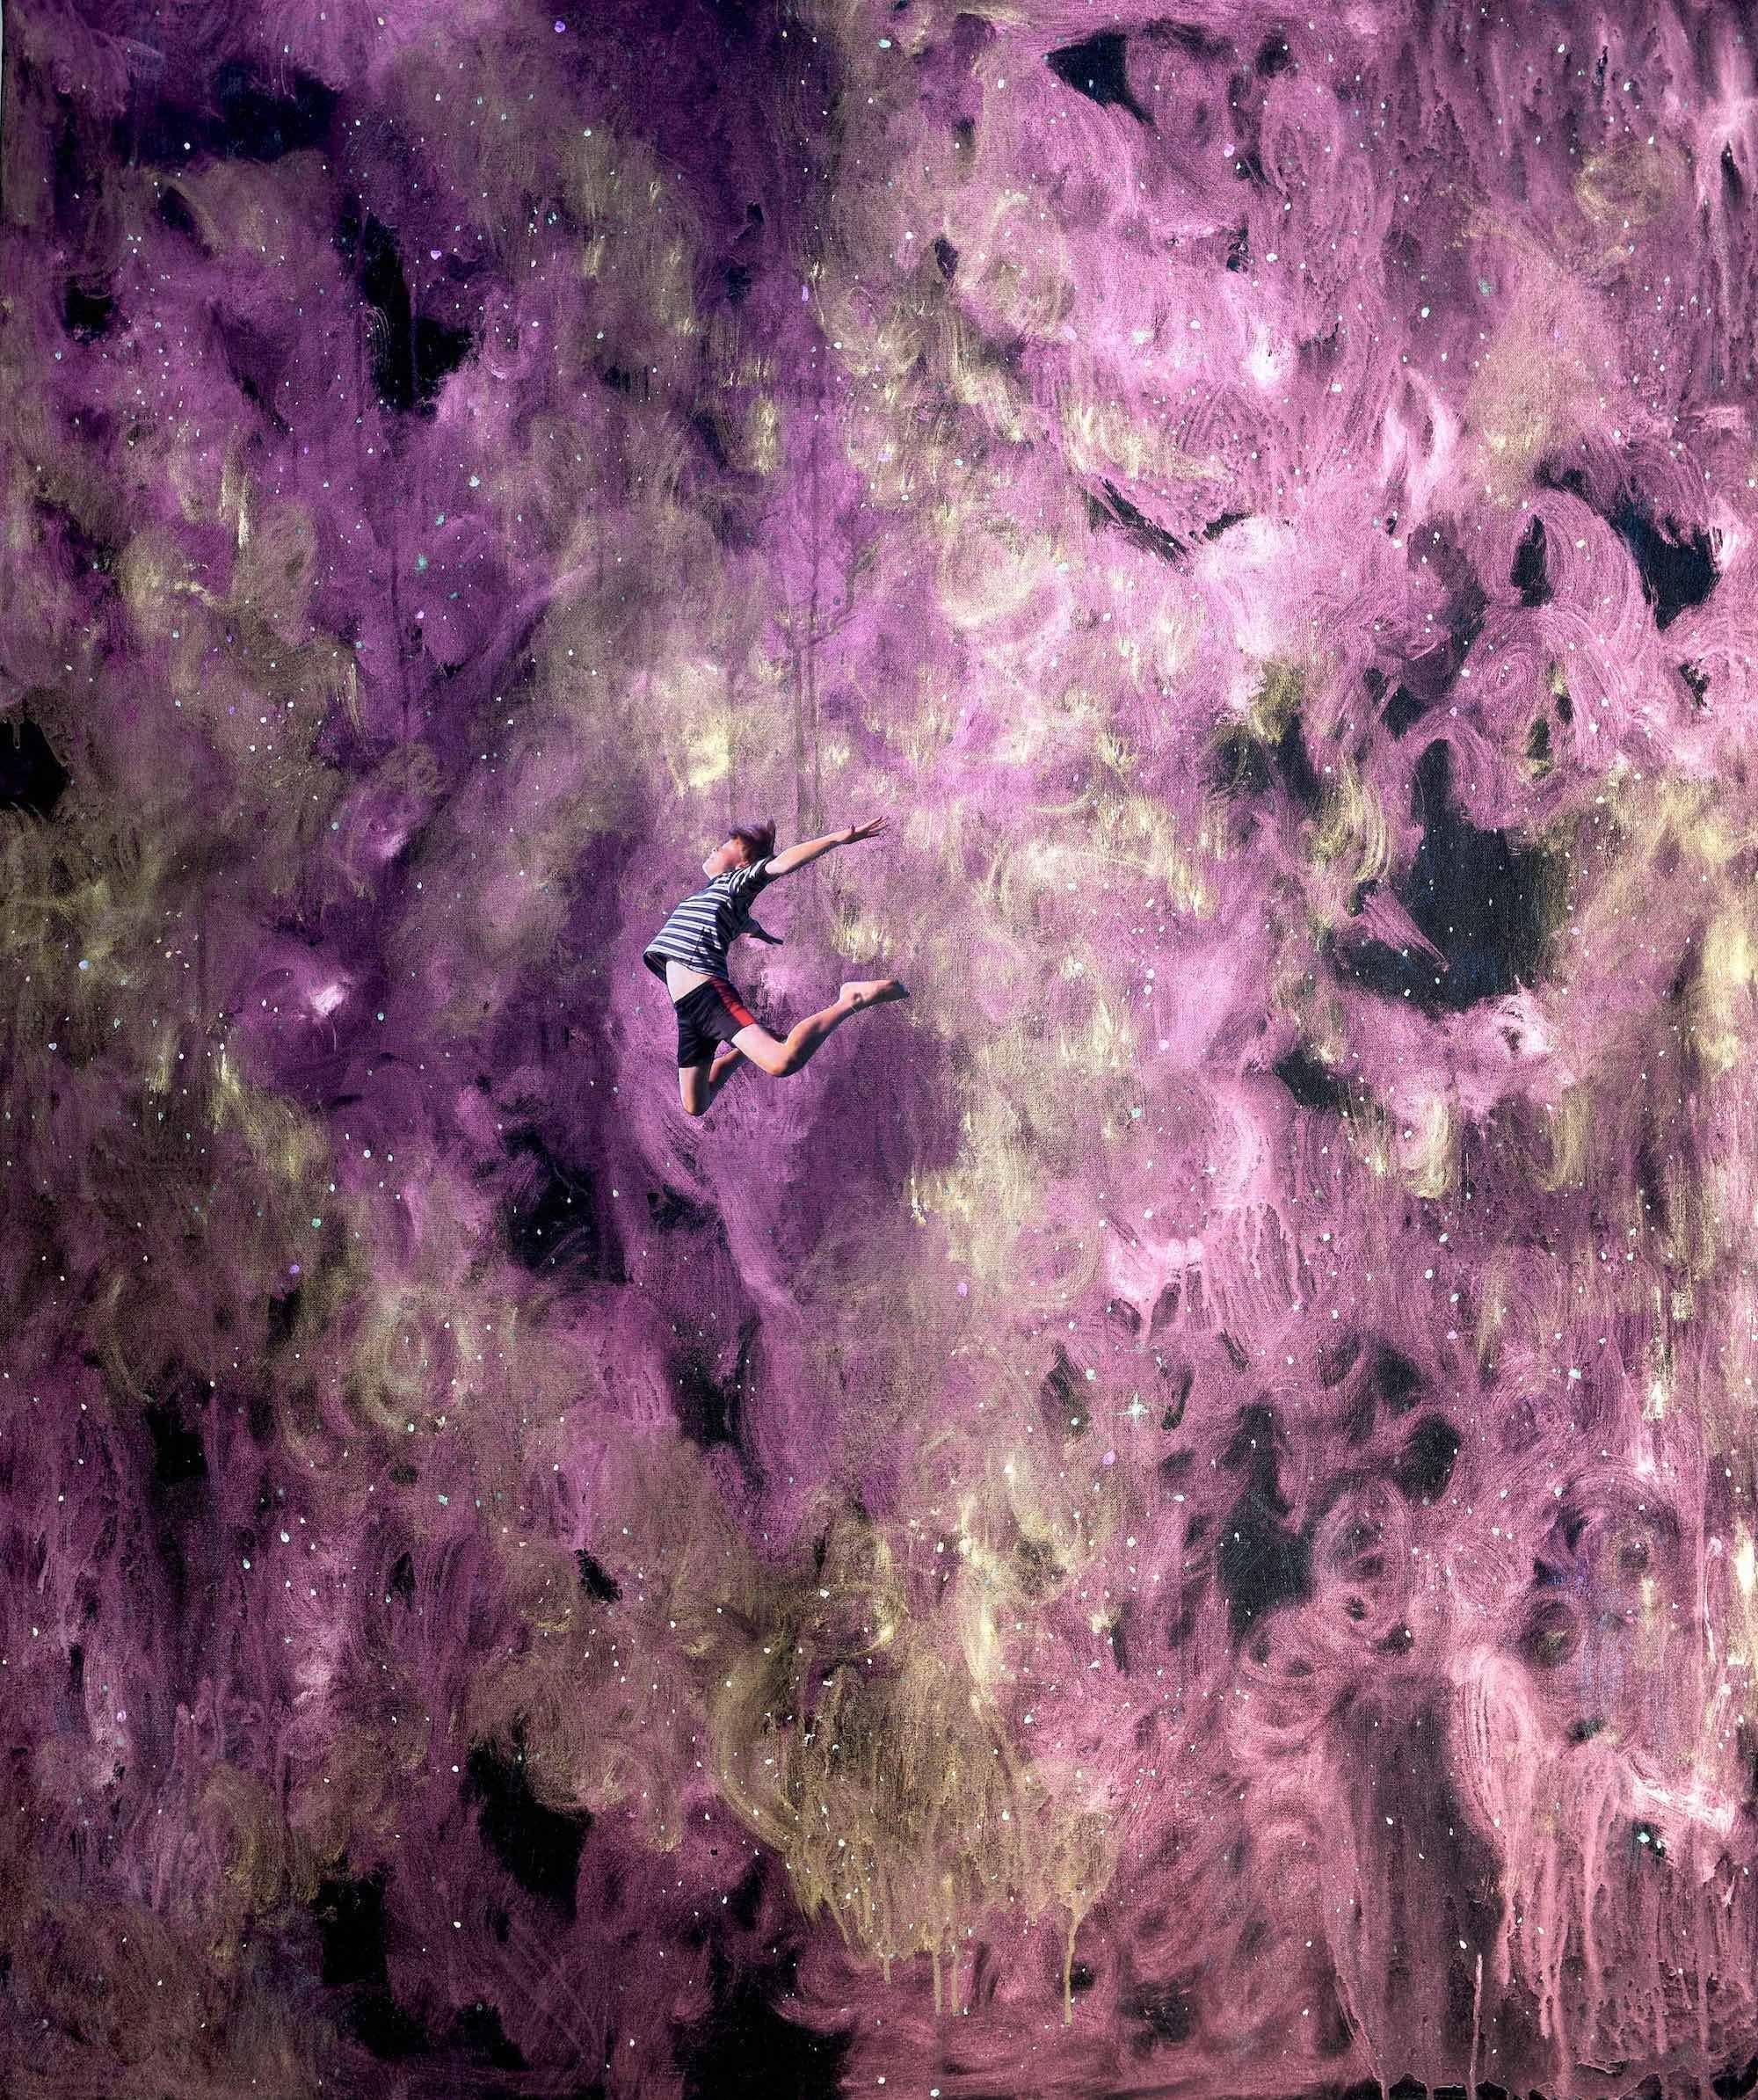 Time Travel - Boy Leaping into a Pink Abstract Space - Glow in the Dark - Painting by Veronica Green